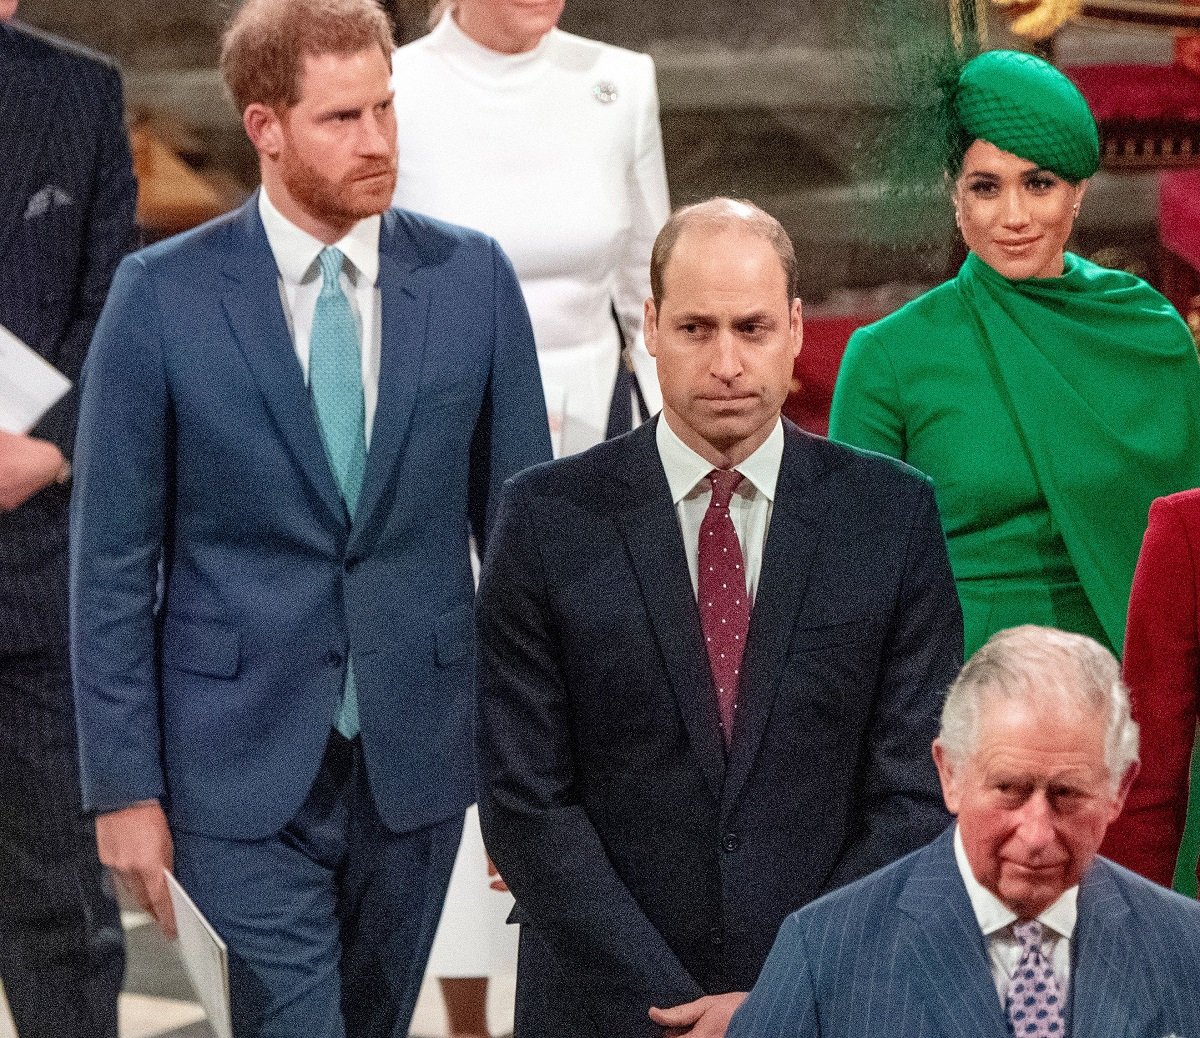 King Charles and Prince William Refused to Have Video Call With Meghan Markle Because They Didn’t Trust Her, Book Claims